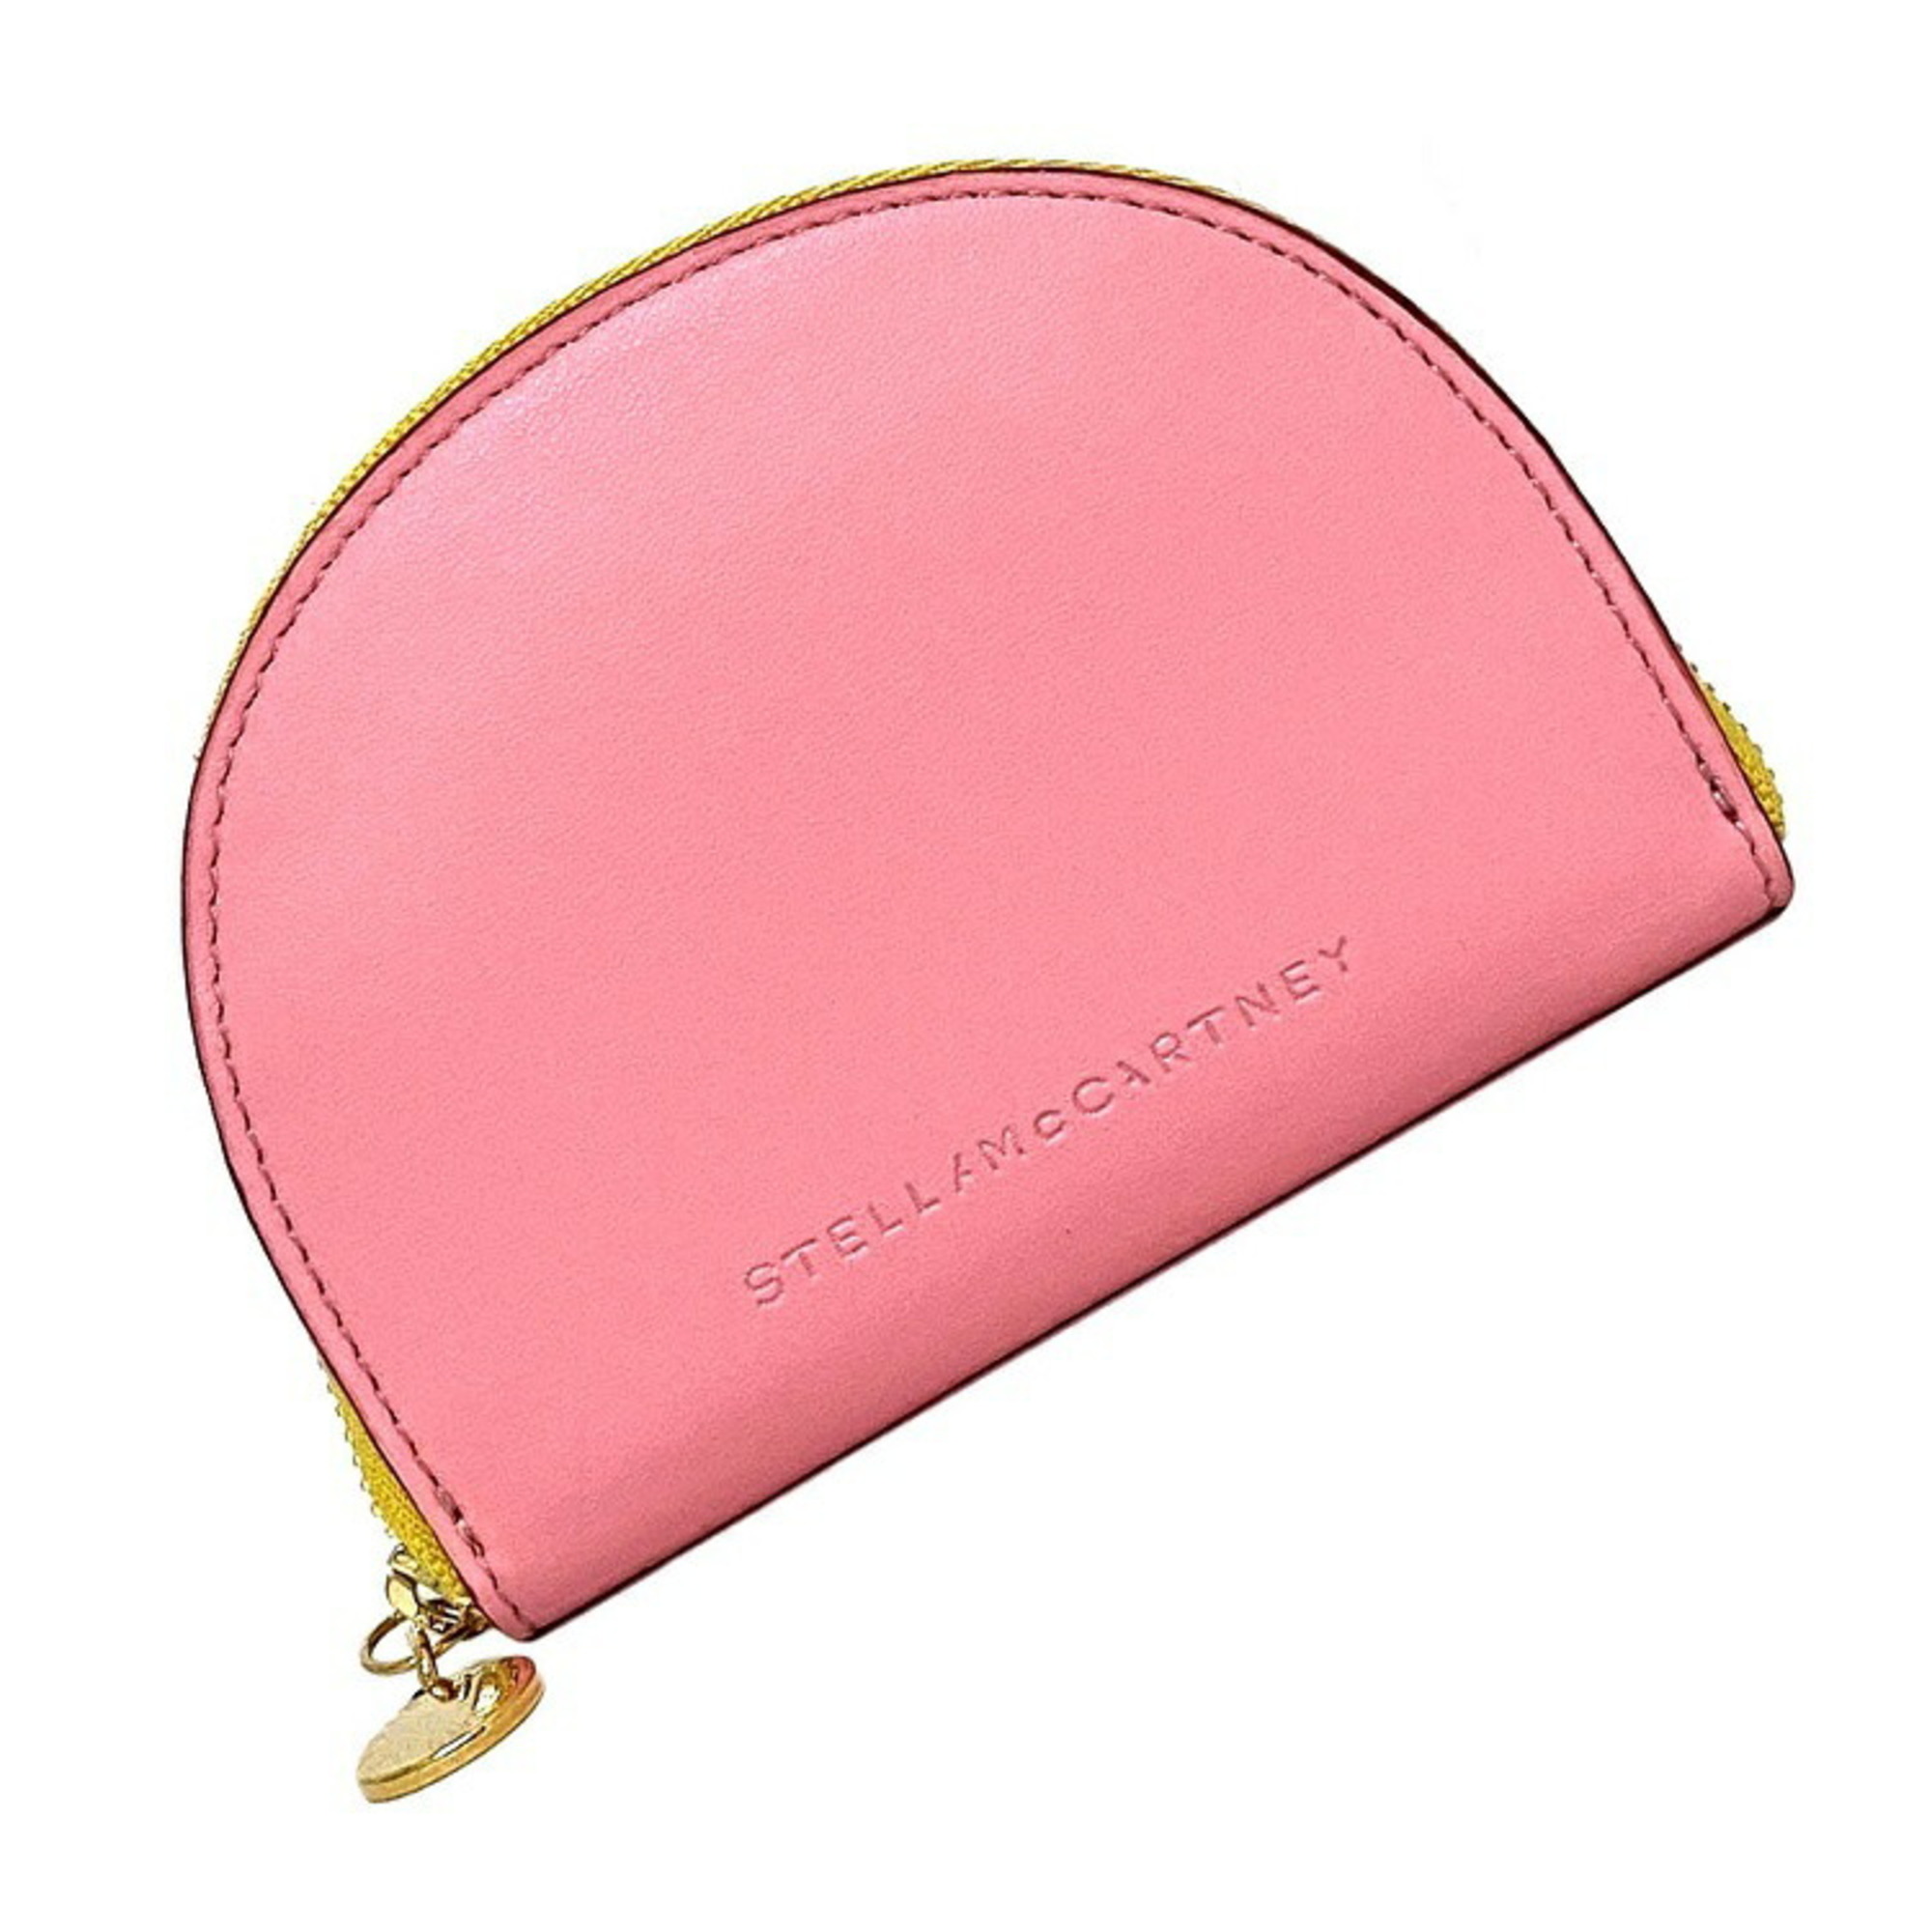 Authenticated Used Stella McCartney coin case pink yellow gold 700258 w8857  6601 leather STELLA McCARTNEY purse half moon wallet compact